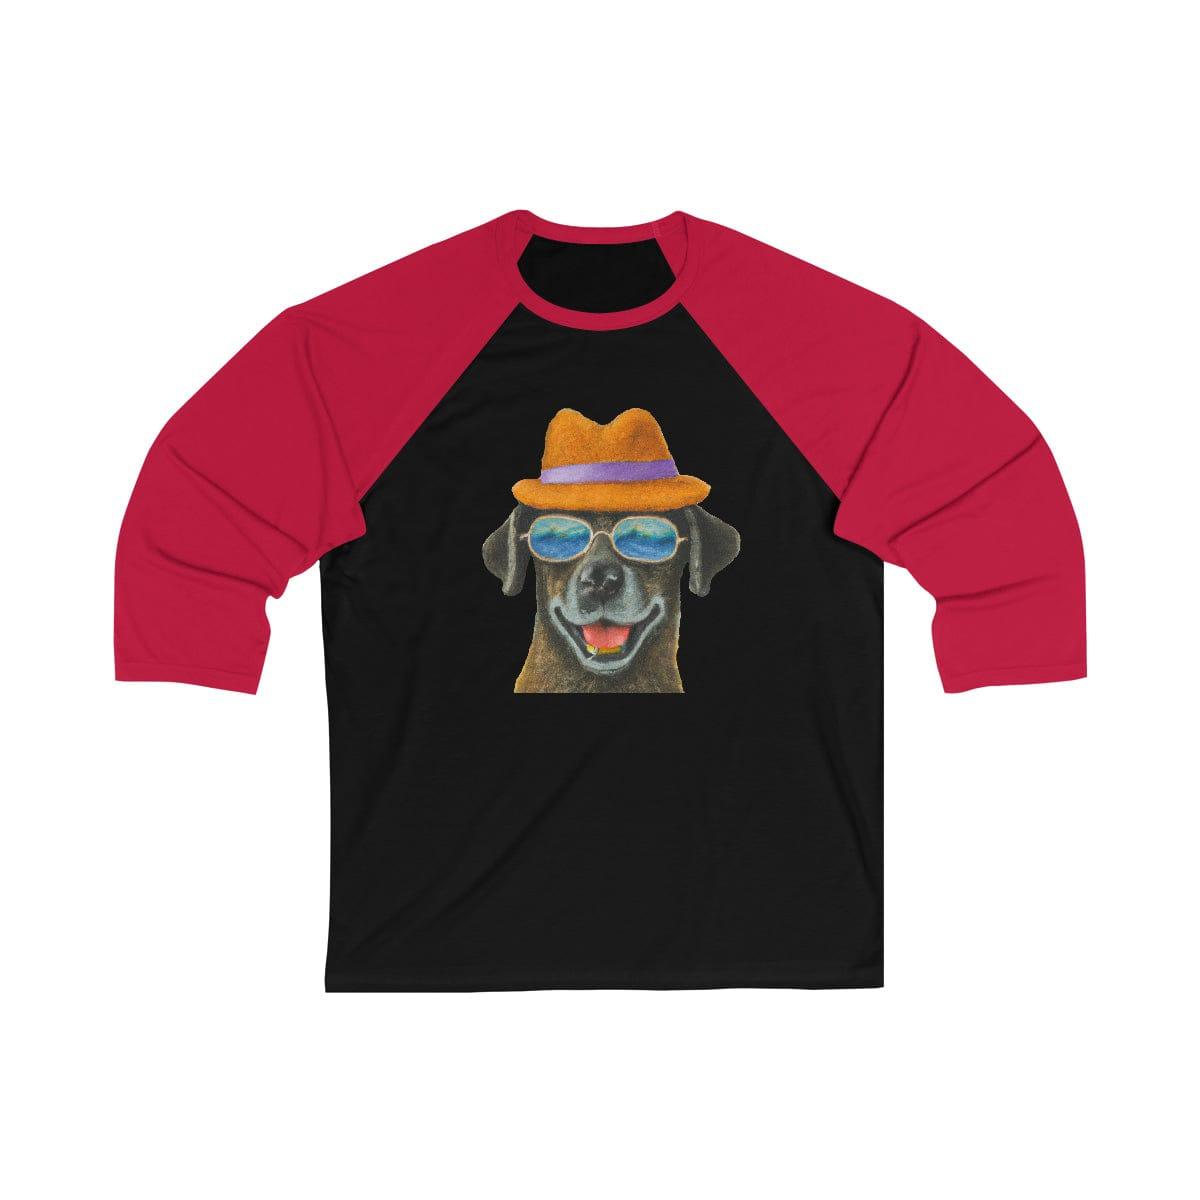 Dog at the beach wearing a hat and sunglasses arts unisex 3\4 Sleeve Baseball Tee for women